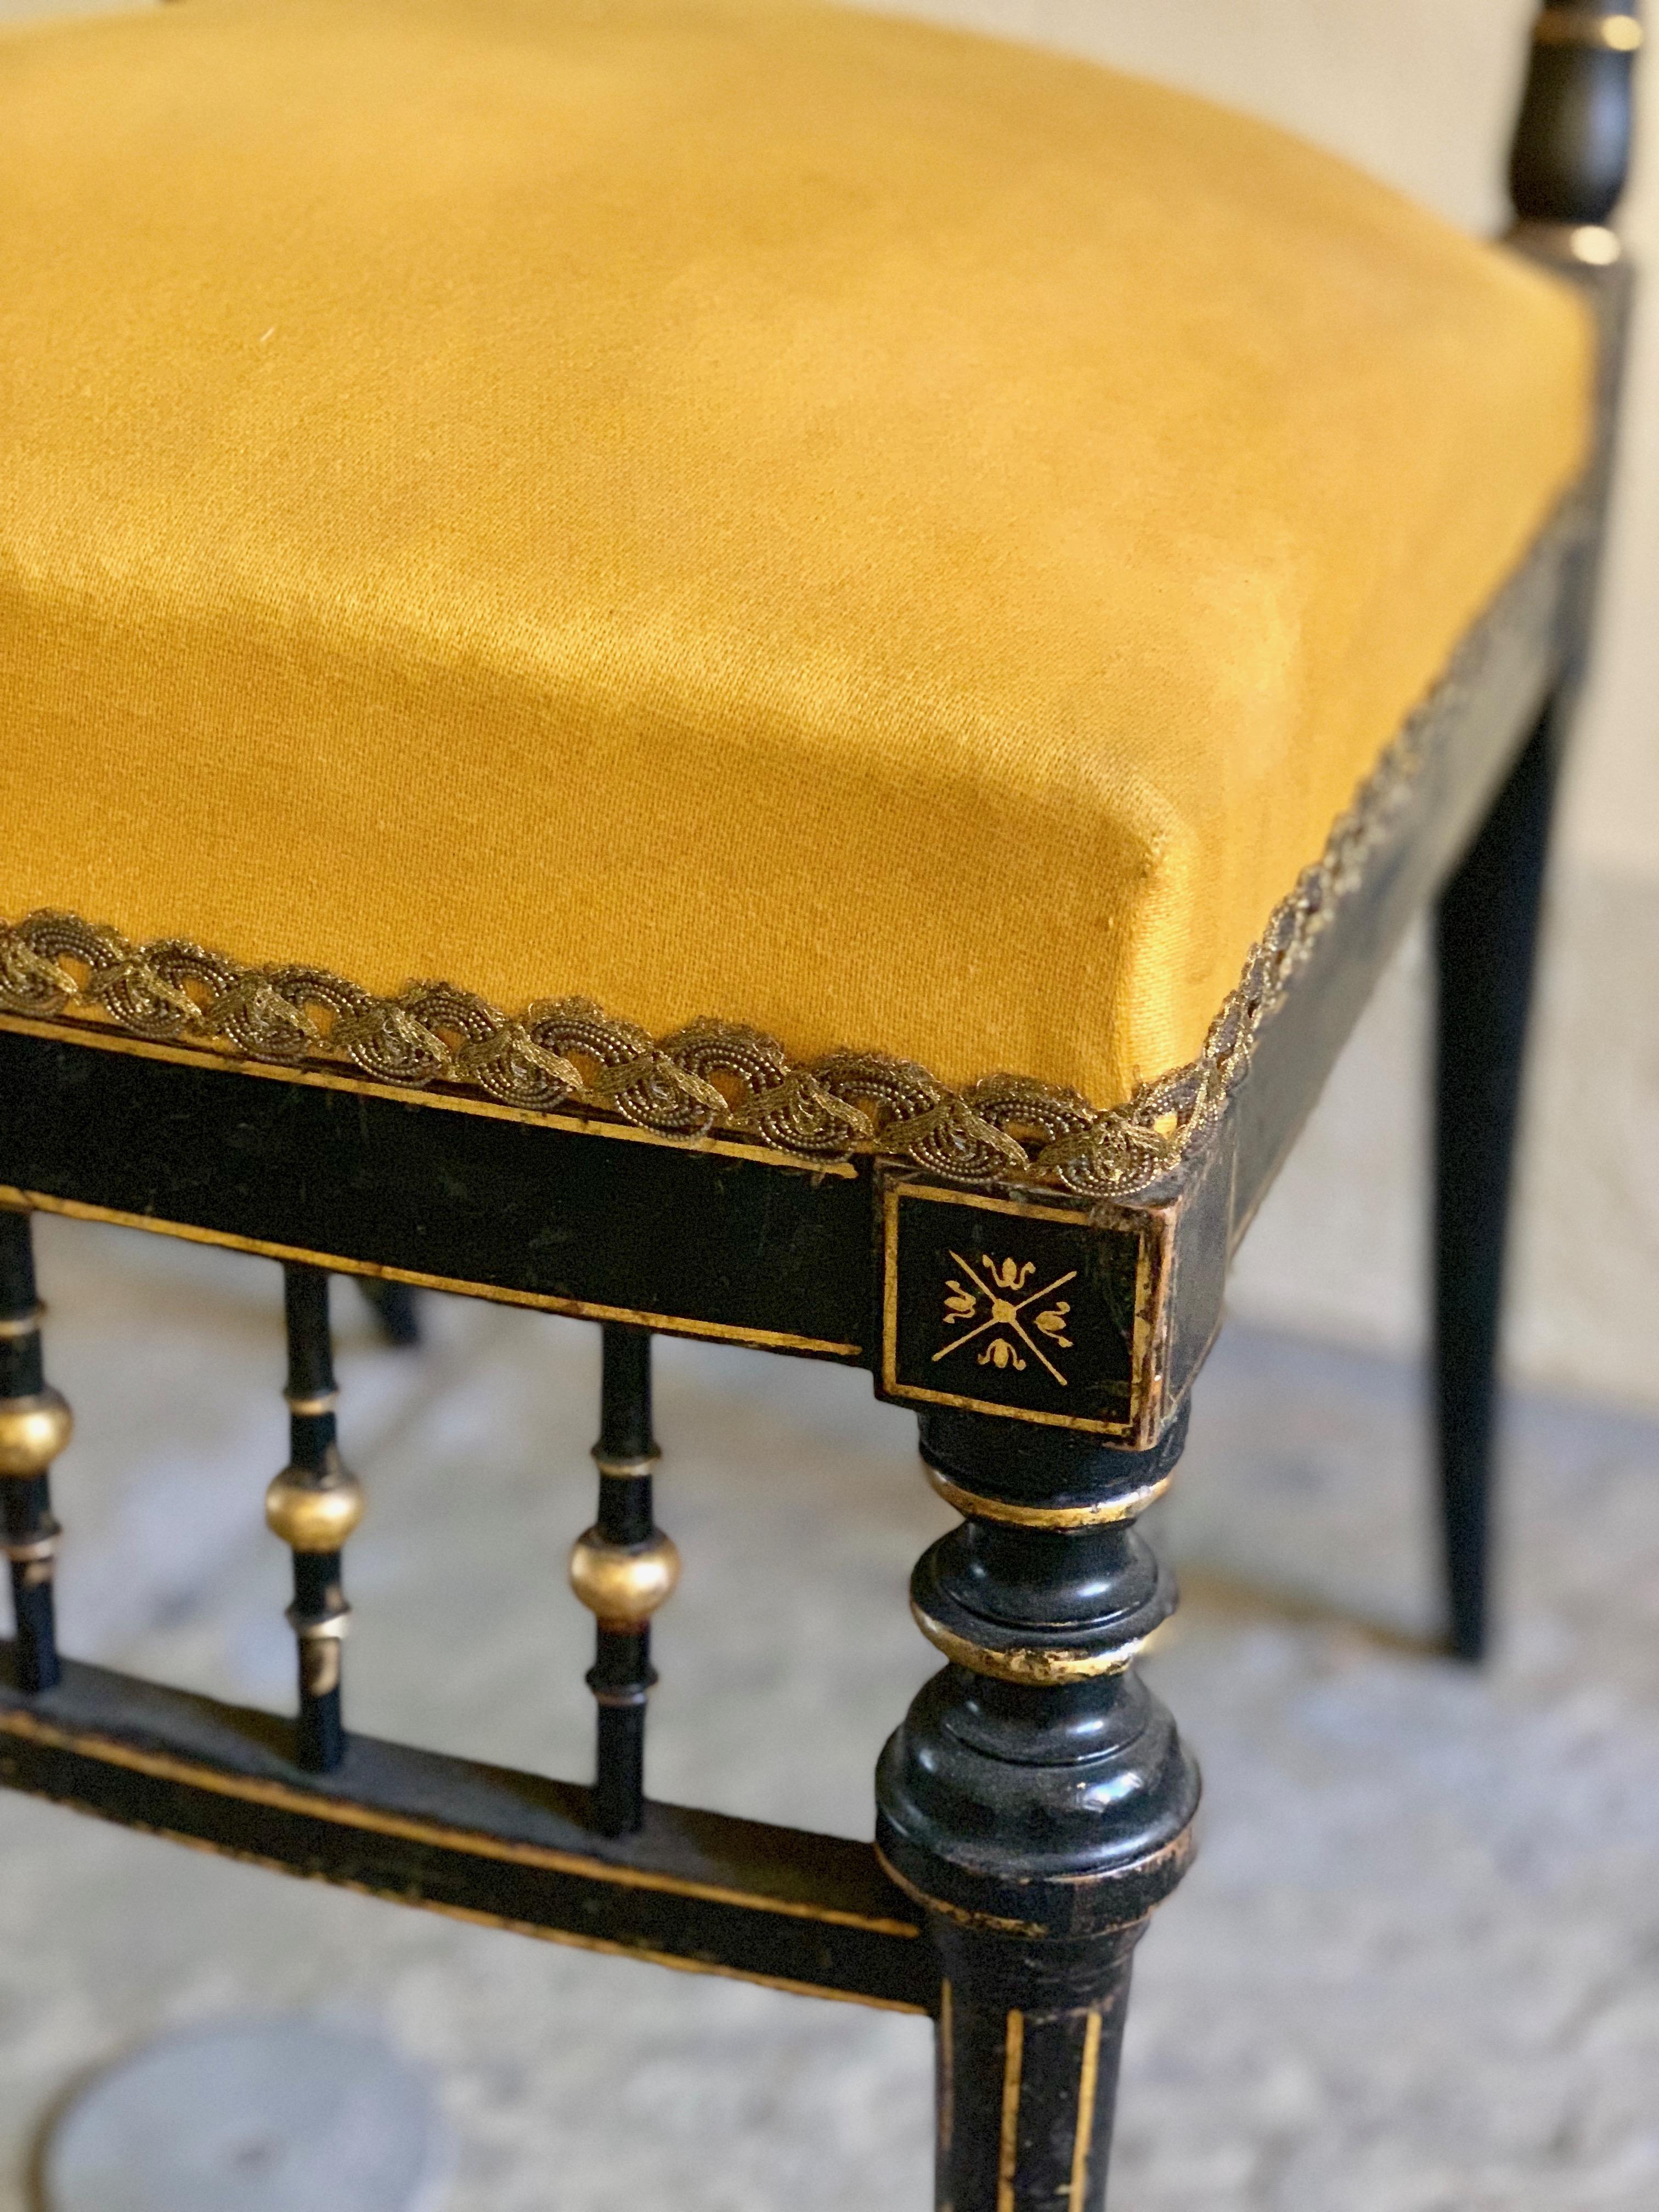 Early 20th Century French Chair with Gilt Detailing (Ebonisiert)